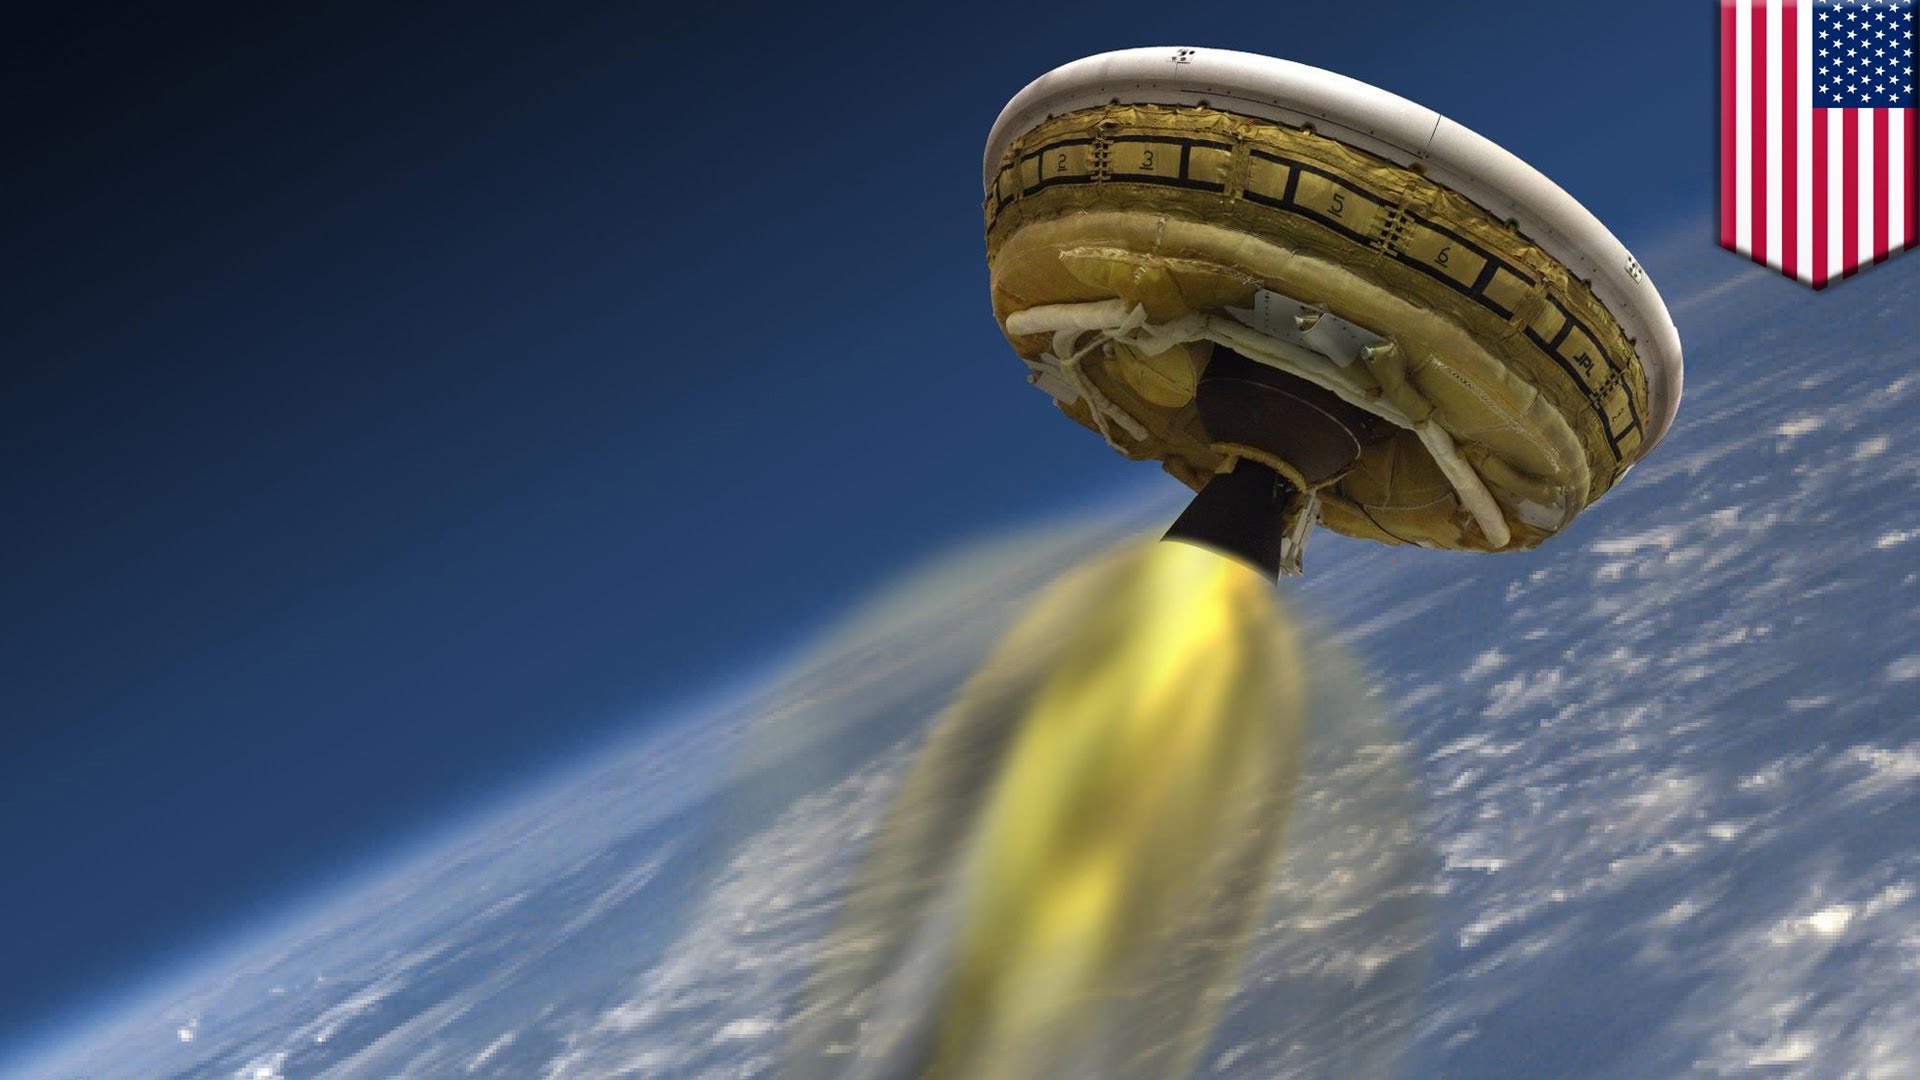 Watch NASA Spin Test Its Low-Density Supersonic Decelerator, or Flying Saucer, LIVE!